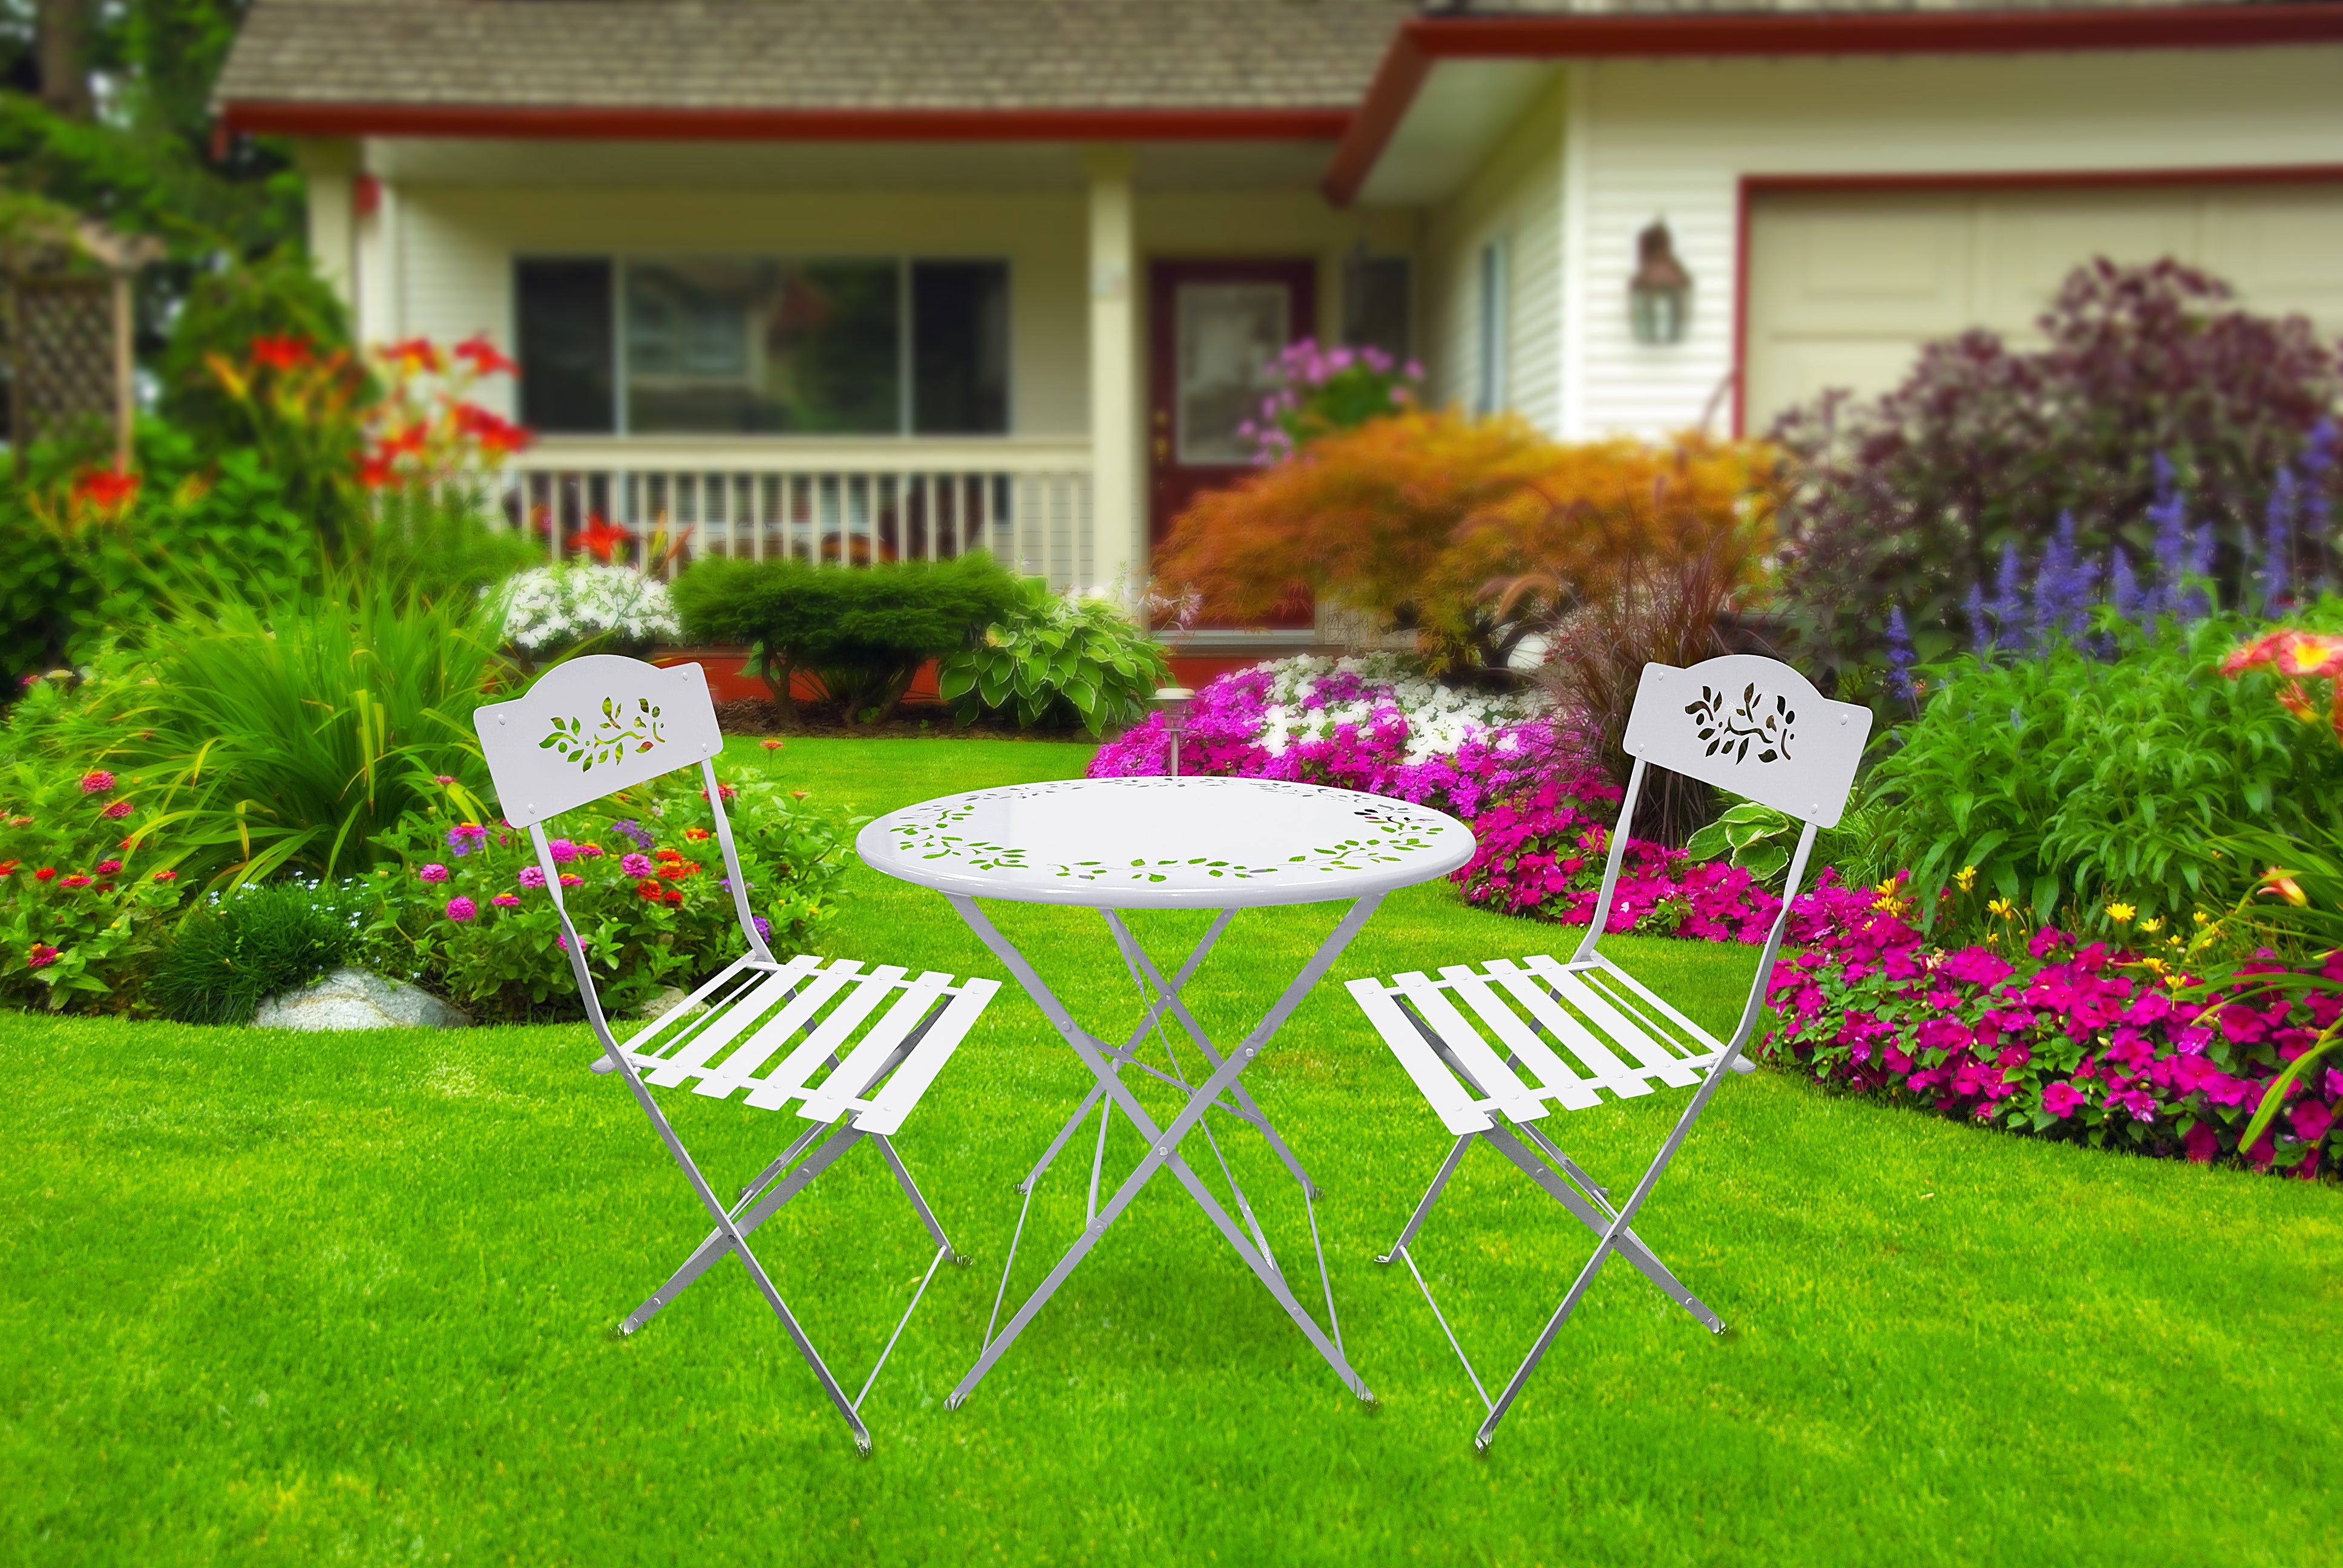 Alpine Corporation Bistro Set Folding Table and Chairs Patio Set 5 colors